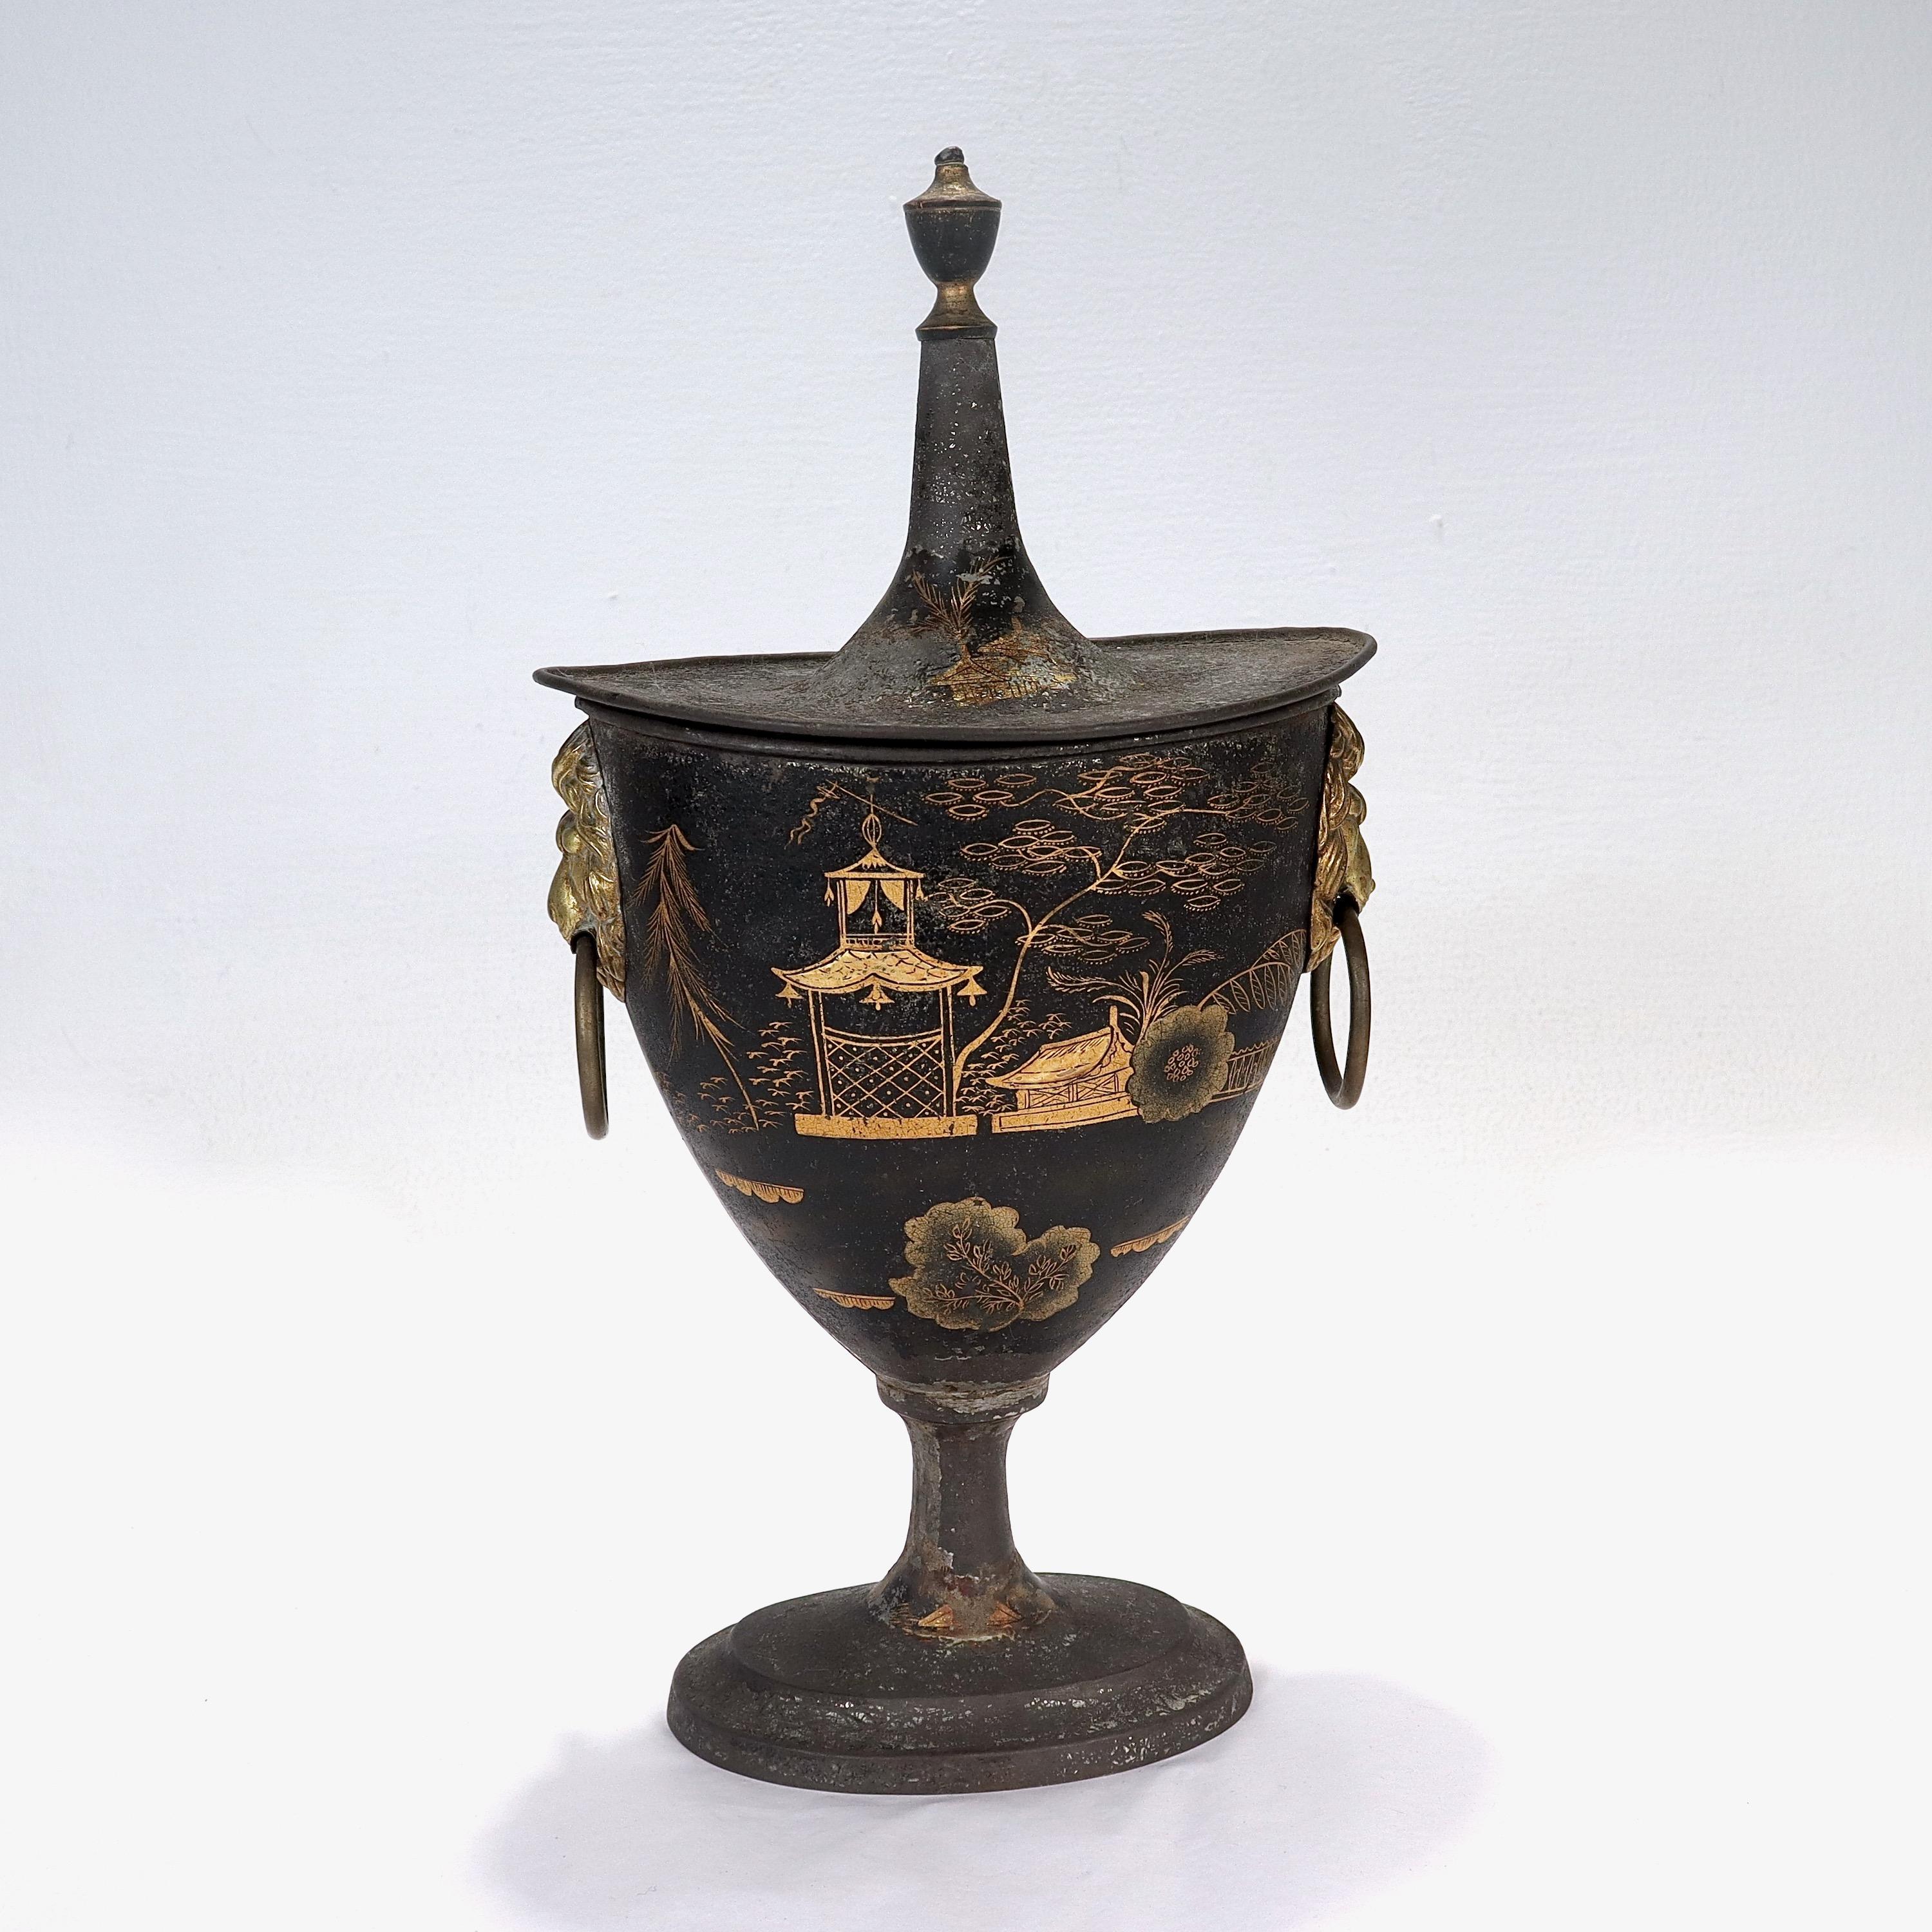 A fine antique toleware covered urn or vase.

Decorated throughout with gilt Chinoiserie decoration.

There is a figural lion's heads to the left & right sides each with a ring handle in their mouth.

There is noticeable loss throughout to the